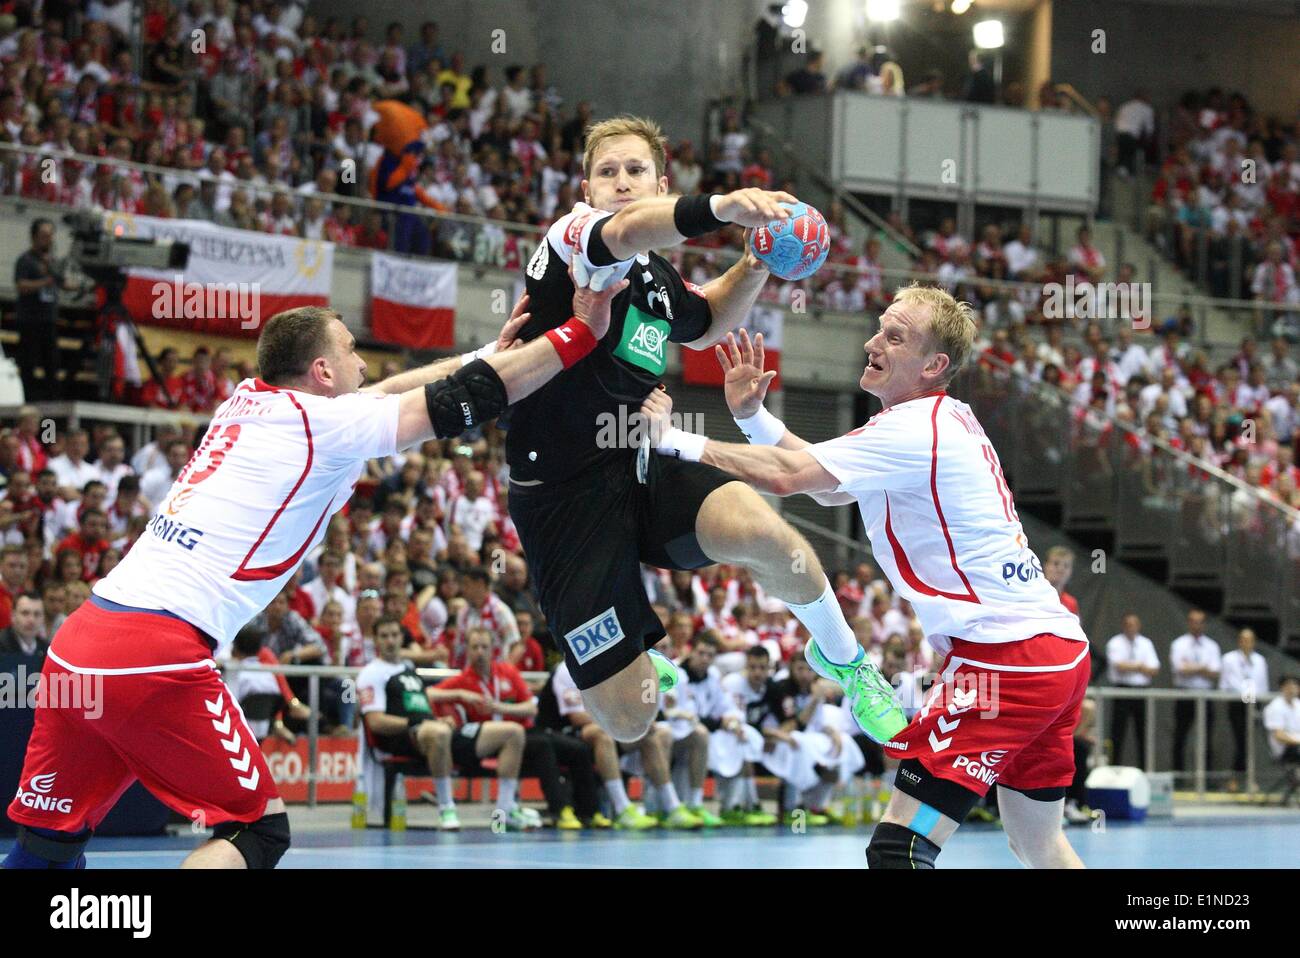 Gdansk, Poland 7th, June 2014 Quatar 2015 Men's World Handball Championship Play Off game between Poland and Germany at ERGO Arena sports hall. Steffen Weinhold (17) in action during the game. Credit:  Michal Fludra/Alamy Live News Stock Photo